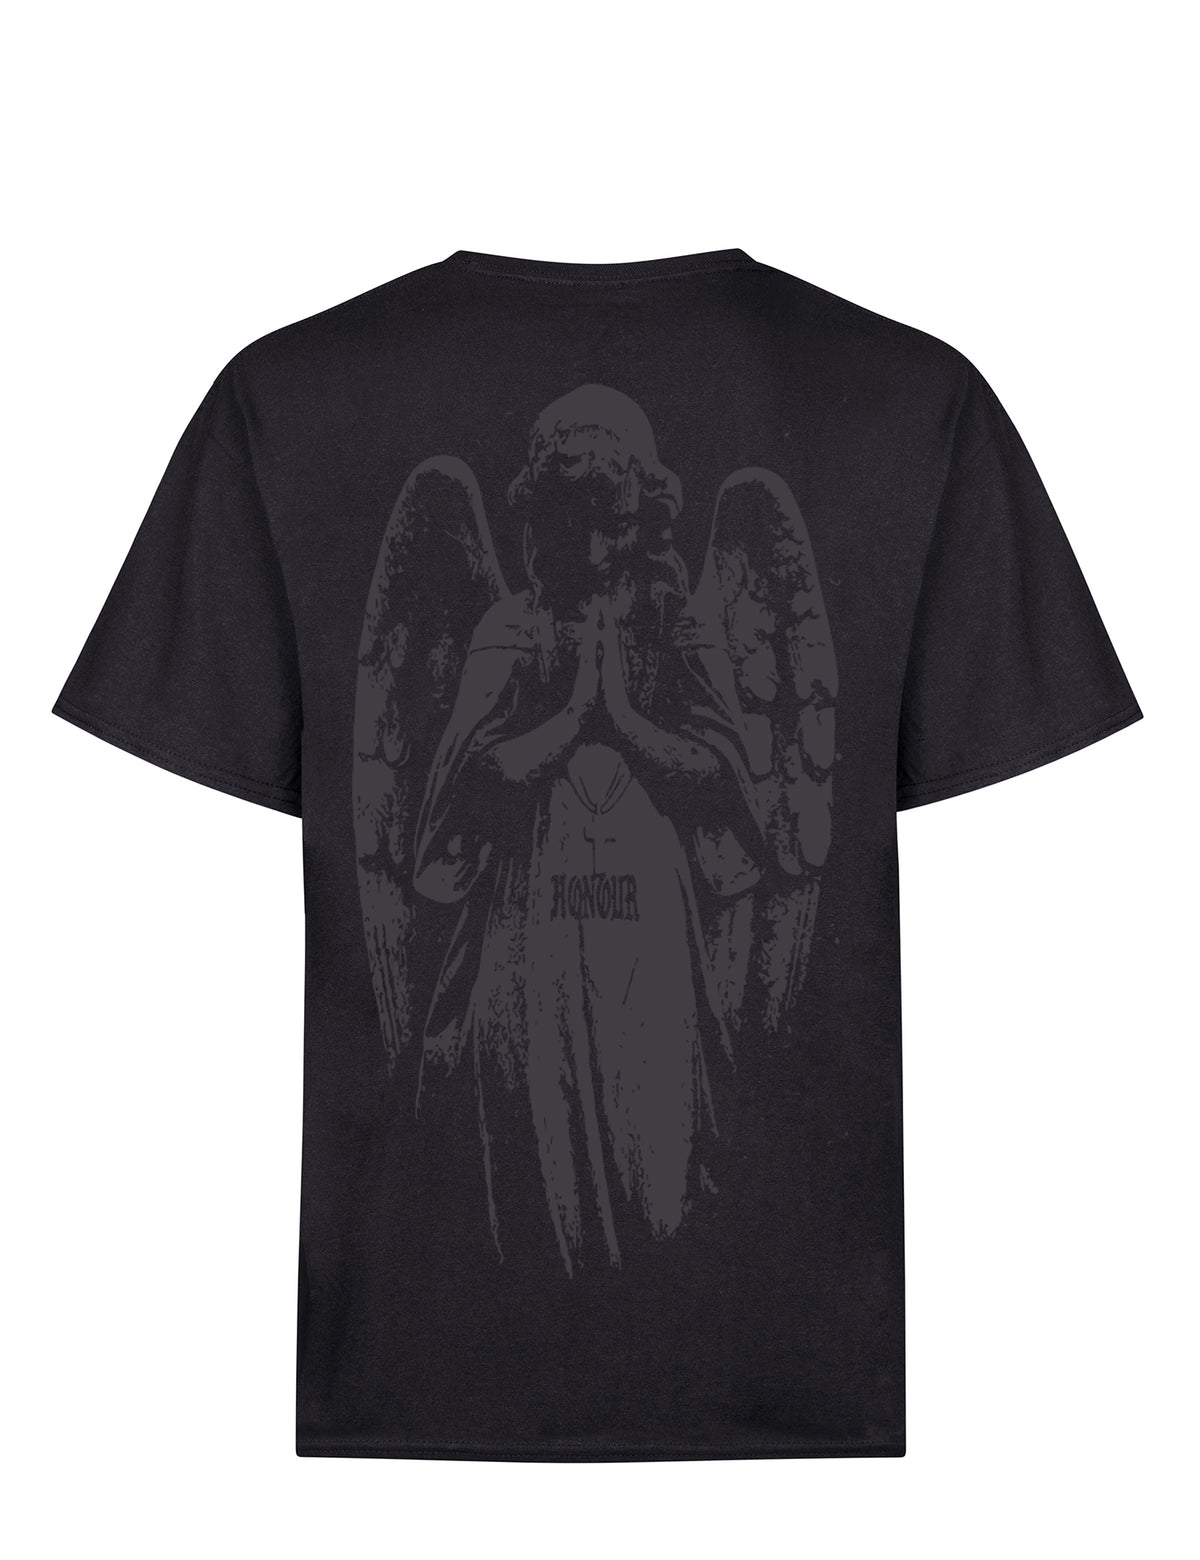 WINGS OF PROTECTION BLACK TEE